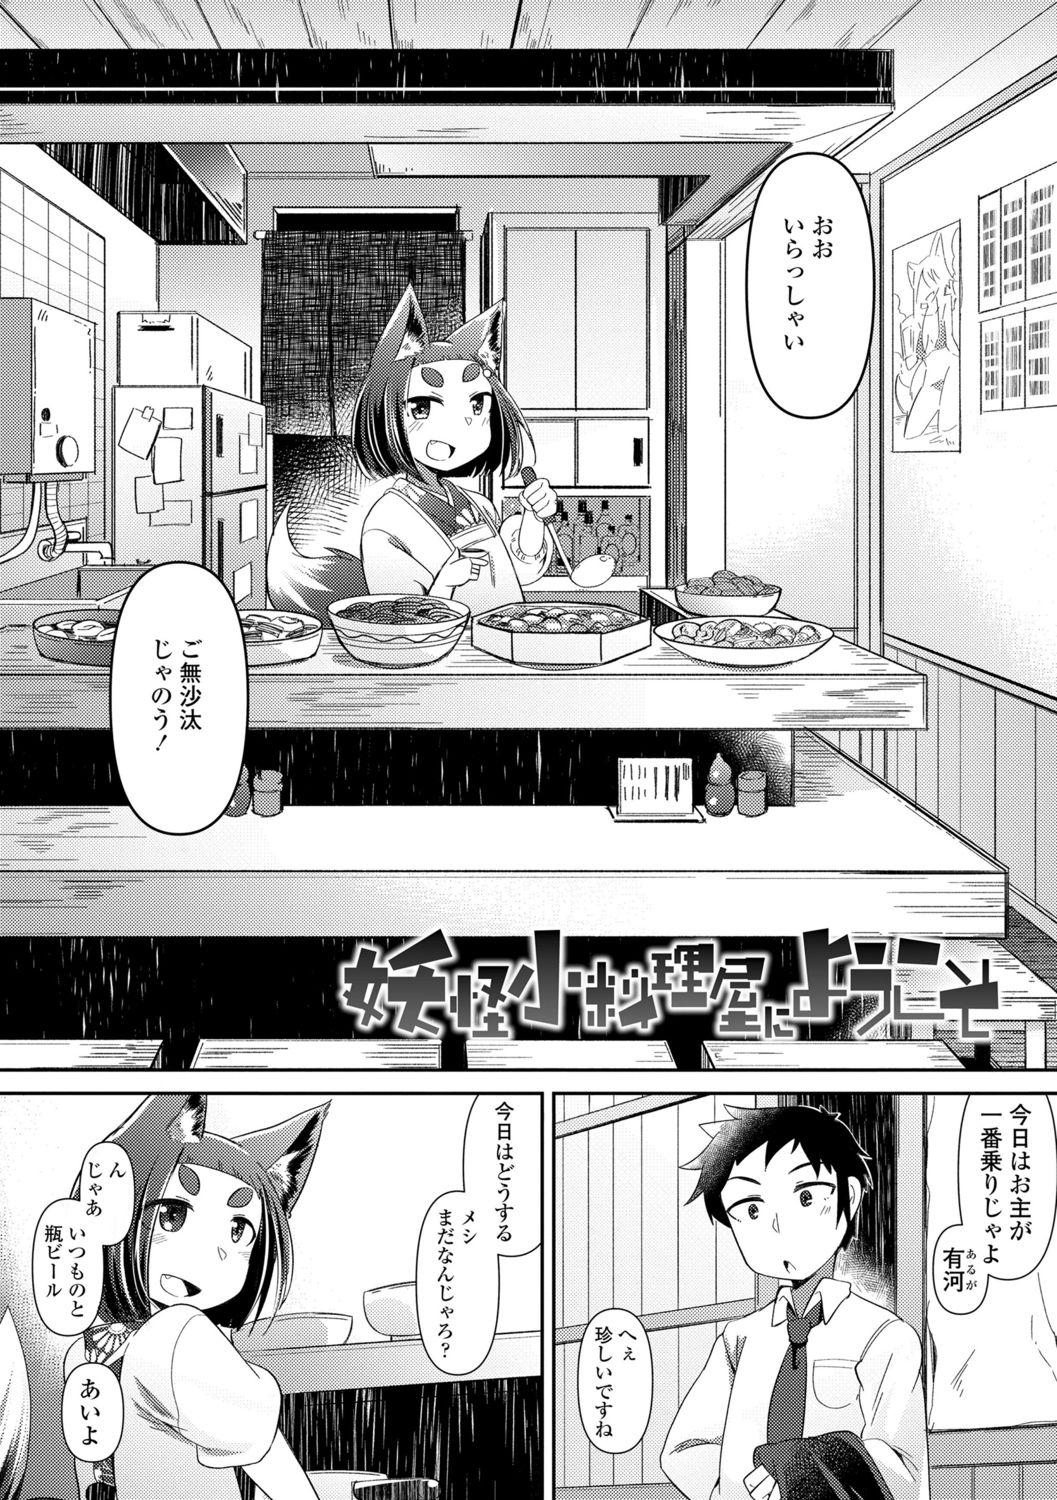 Hood Youkai Koryouriya ni Youkoso - Welcome to apparition small restaurant Rough Sex - Page 8